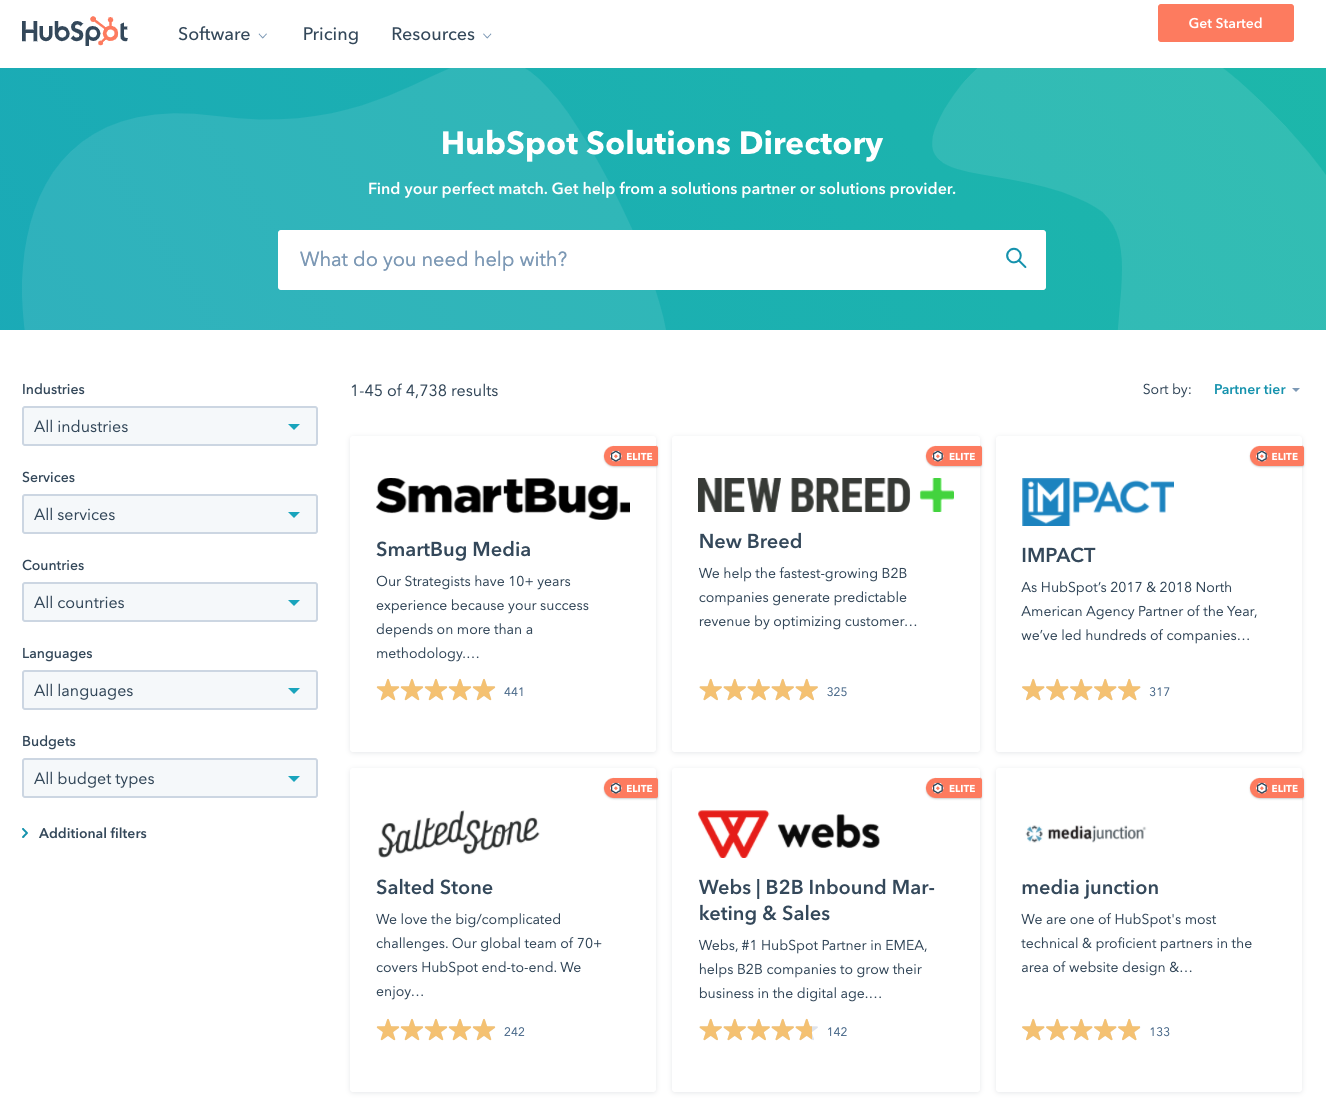 HubSpot Solutions Directory home page